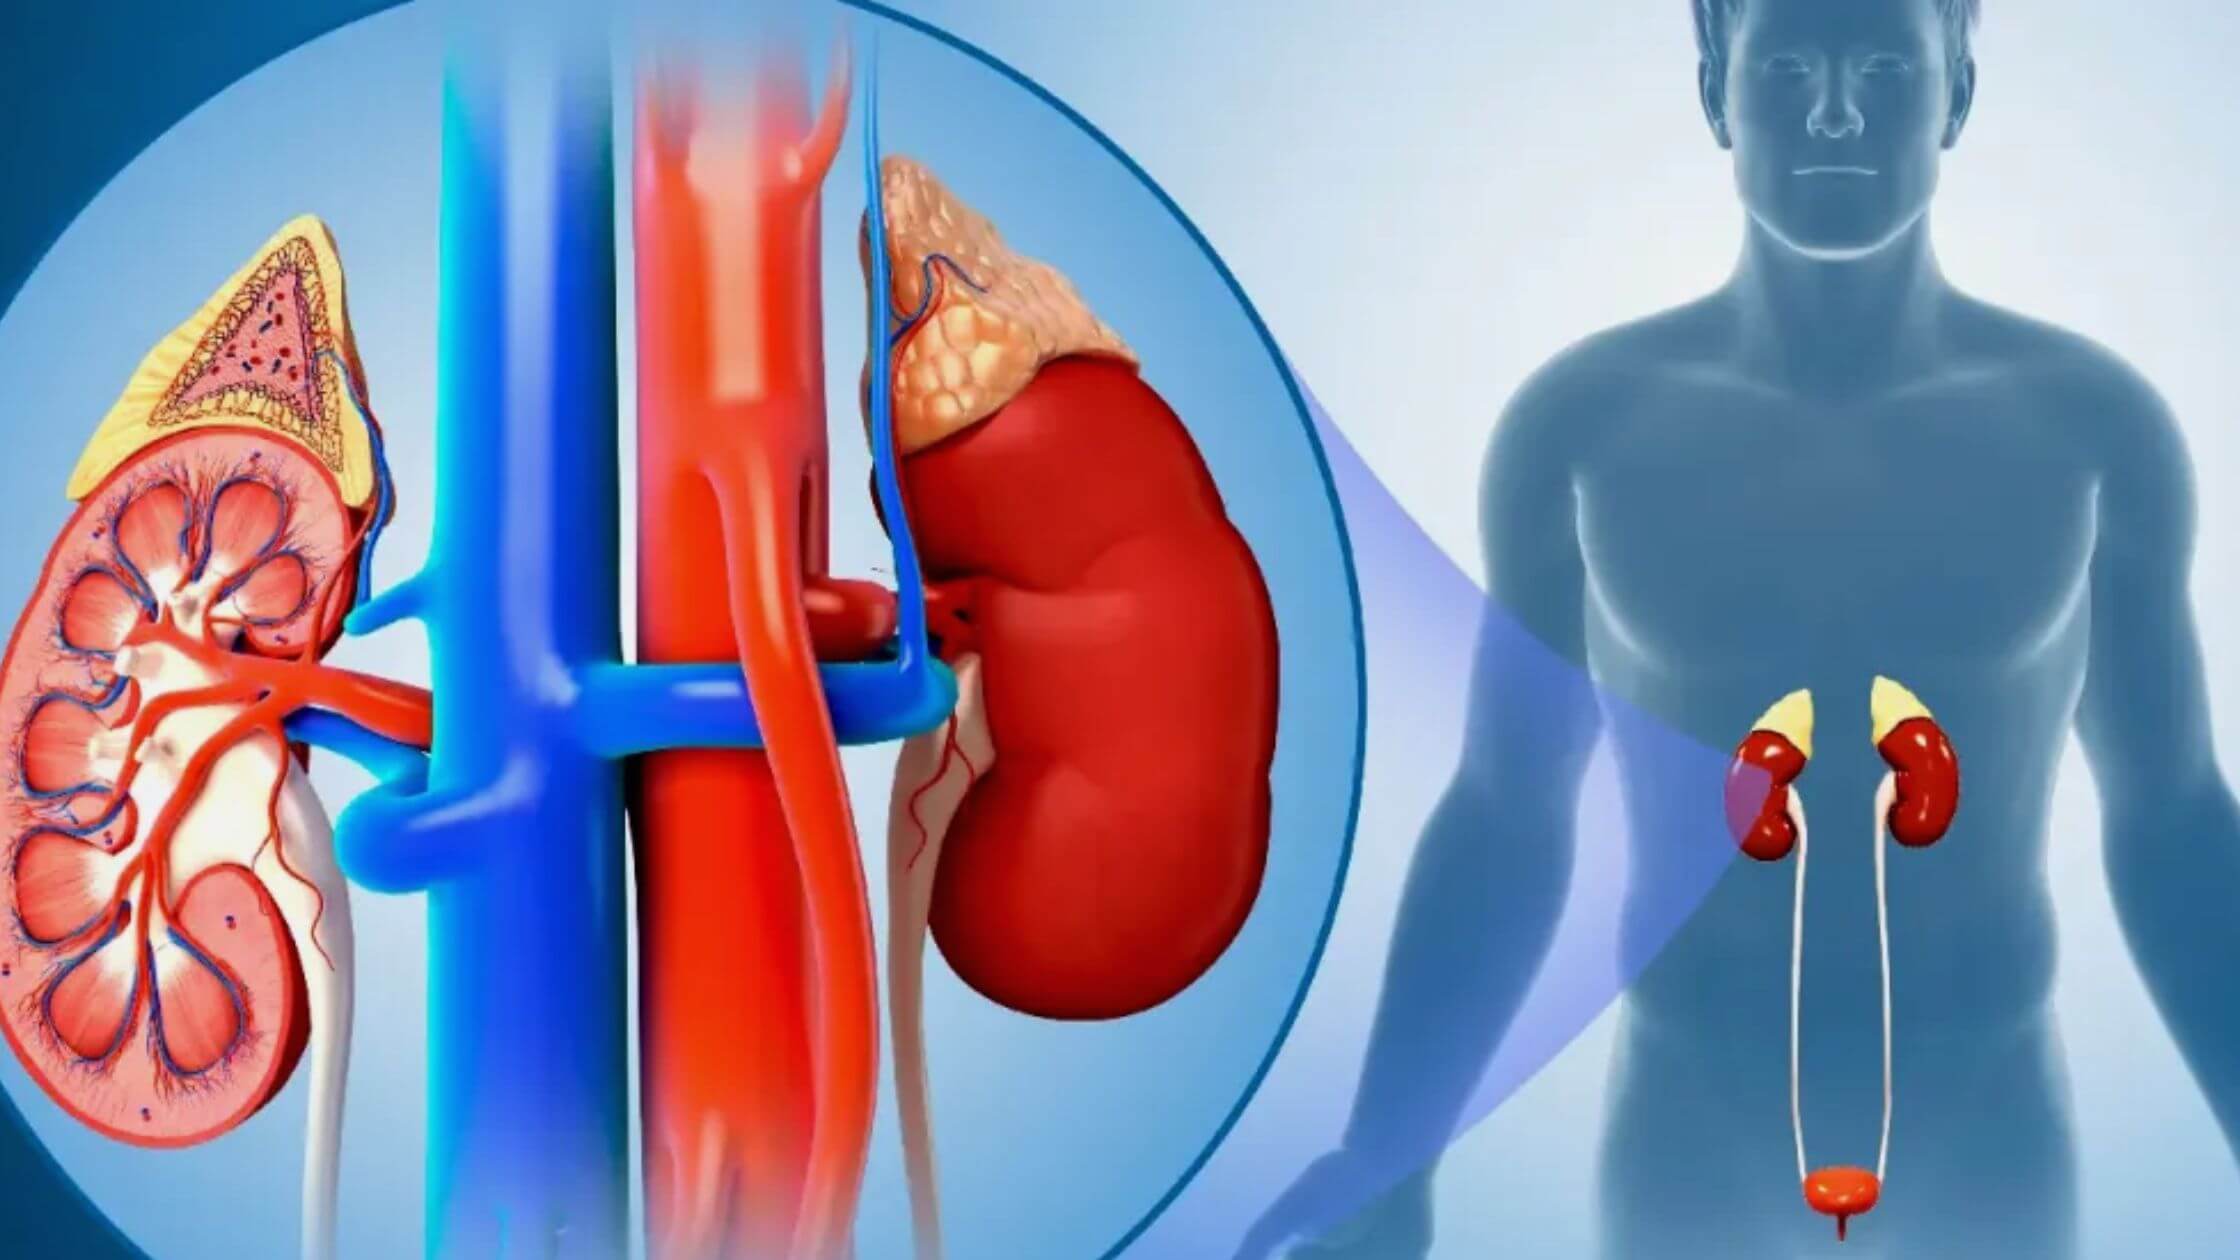 Dehydration Preventing Hormone Associated With Worsening Of Kidney Diseases